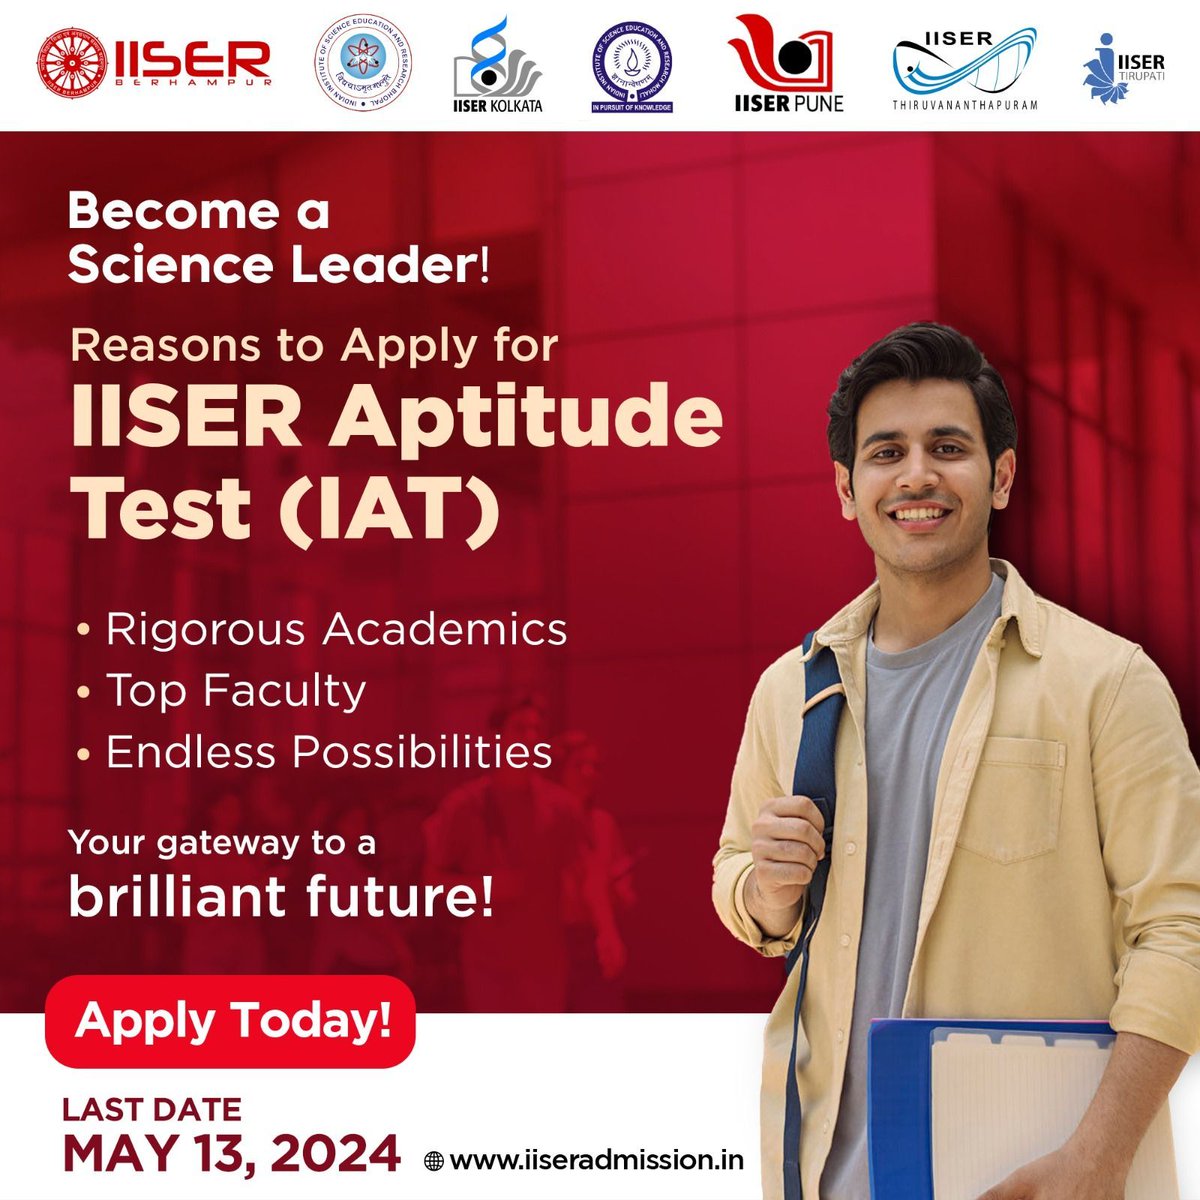 Applications for IAT 2024 close on May 13th, 2024. Apply now at buff.ly/3CF55Xz and embark on a journey of scientific discovery! #IISERs #AdmissionsOpen #IAT2024 #IISERAdmissions #ScienceEducation #Research #BSMS #Opportunity